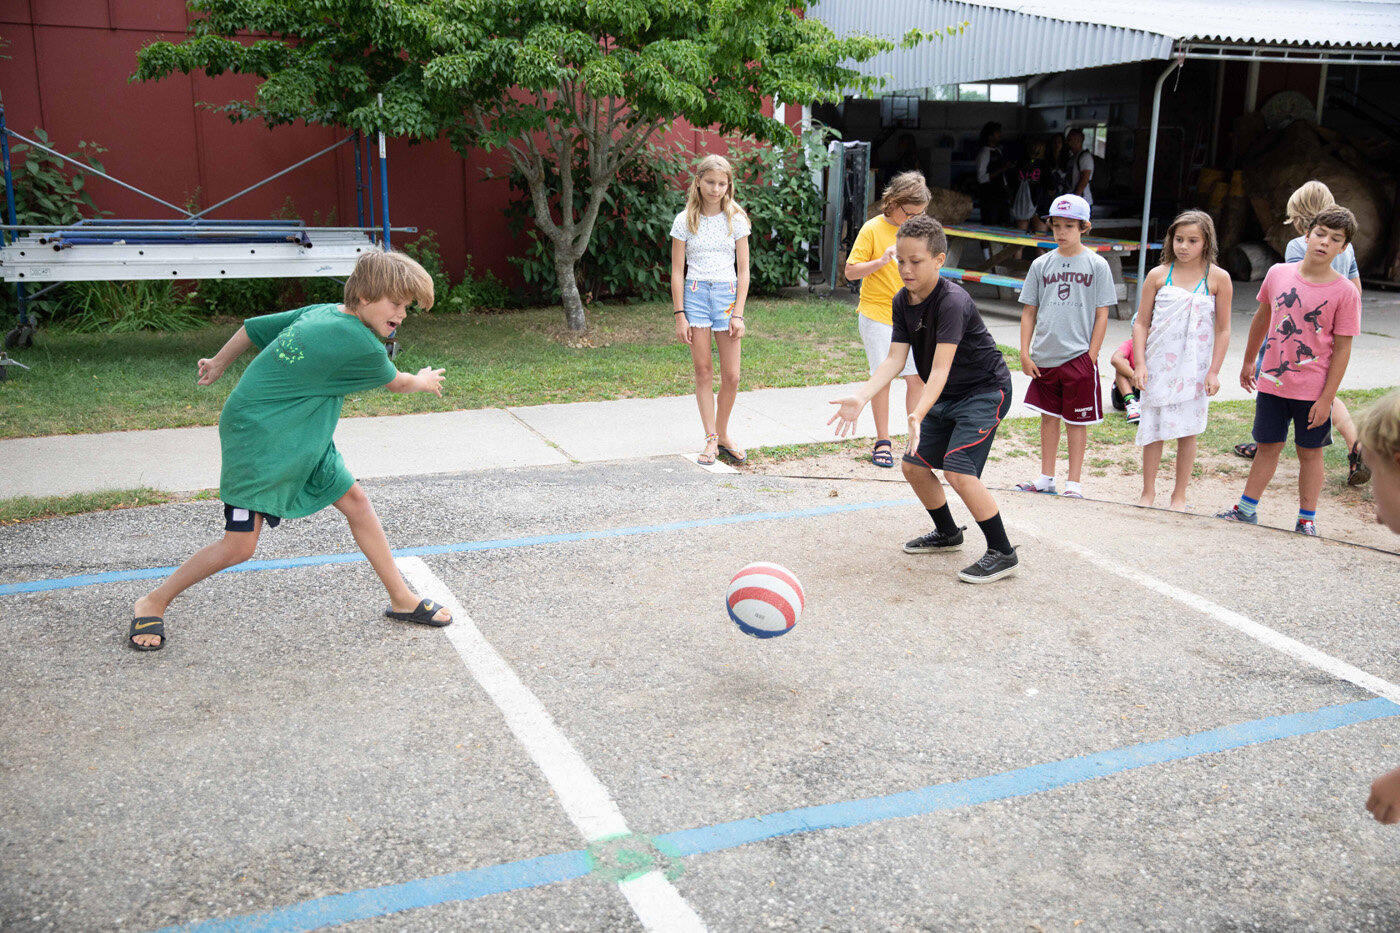 Four Square - Great Camp Games